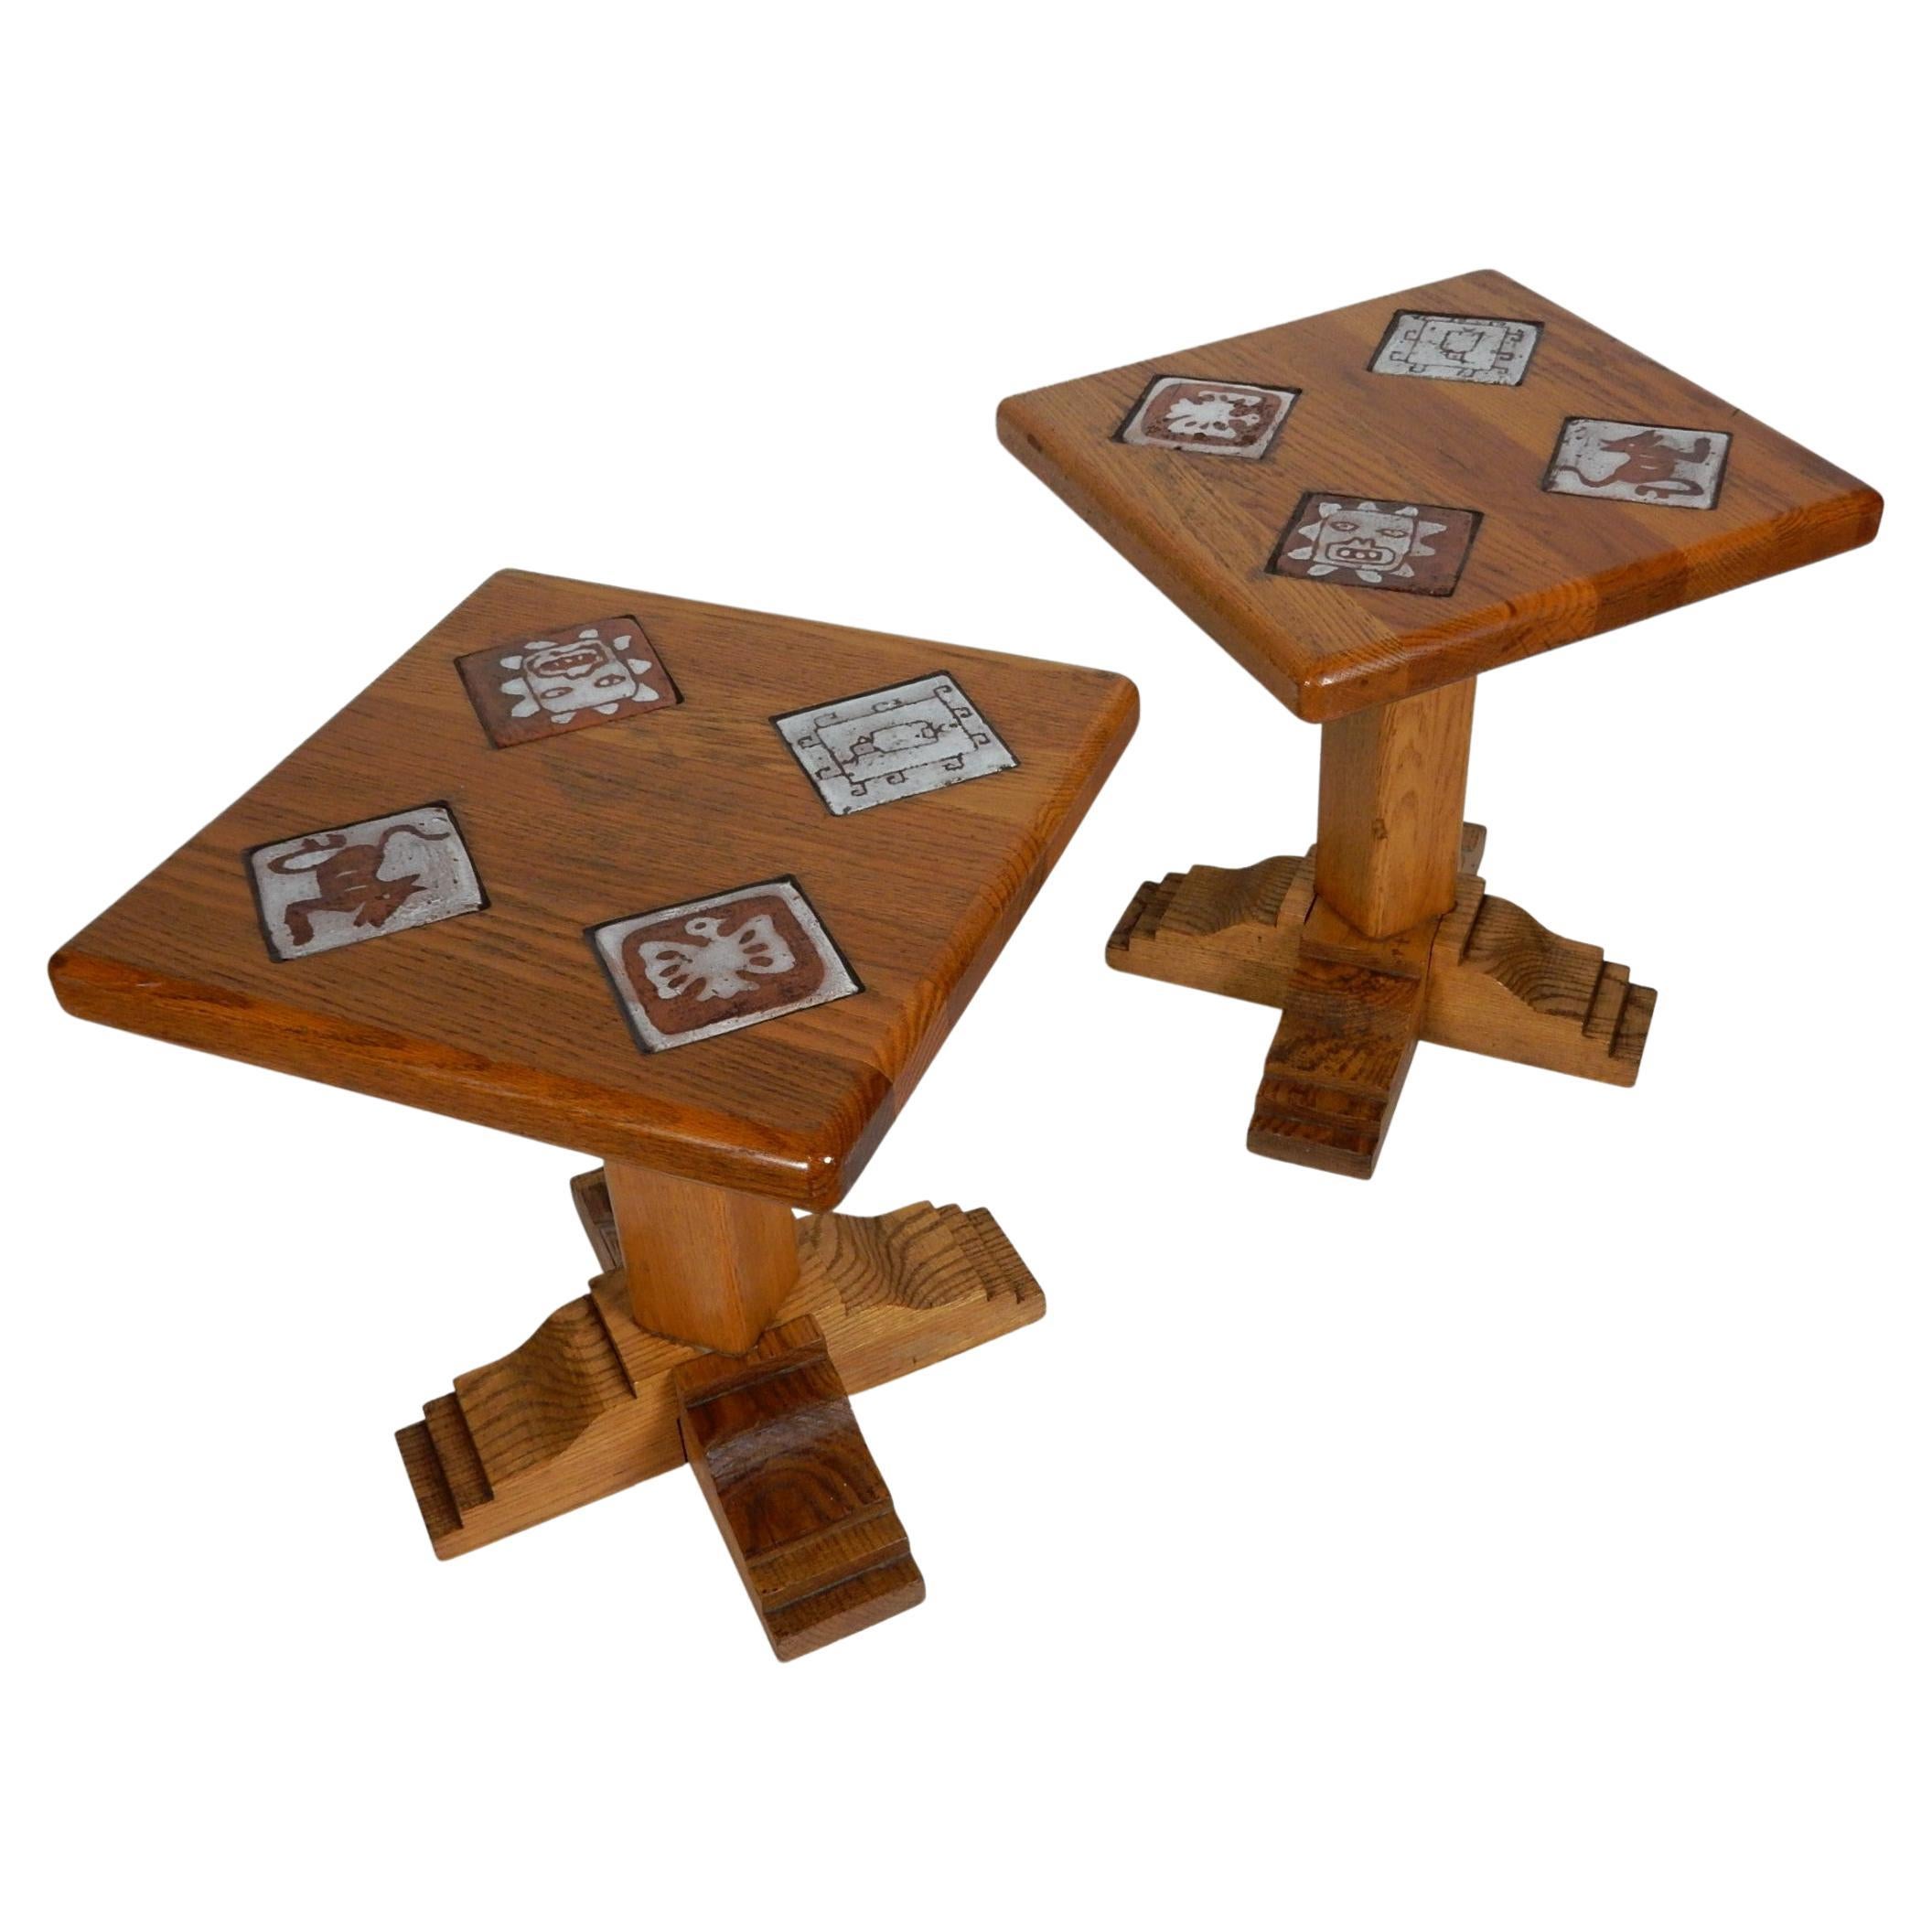 Unique, custom made, solid Oak tile top side tables by Robin and Ronal Clow of  ULLR, Ltd, Steamboat Springs Colorado. Circa 1970's.
Perfect side/drink tables for a mountain ski chalet decor home. Petite size measuring 15in square and 17in tall.